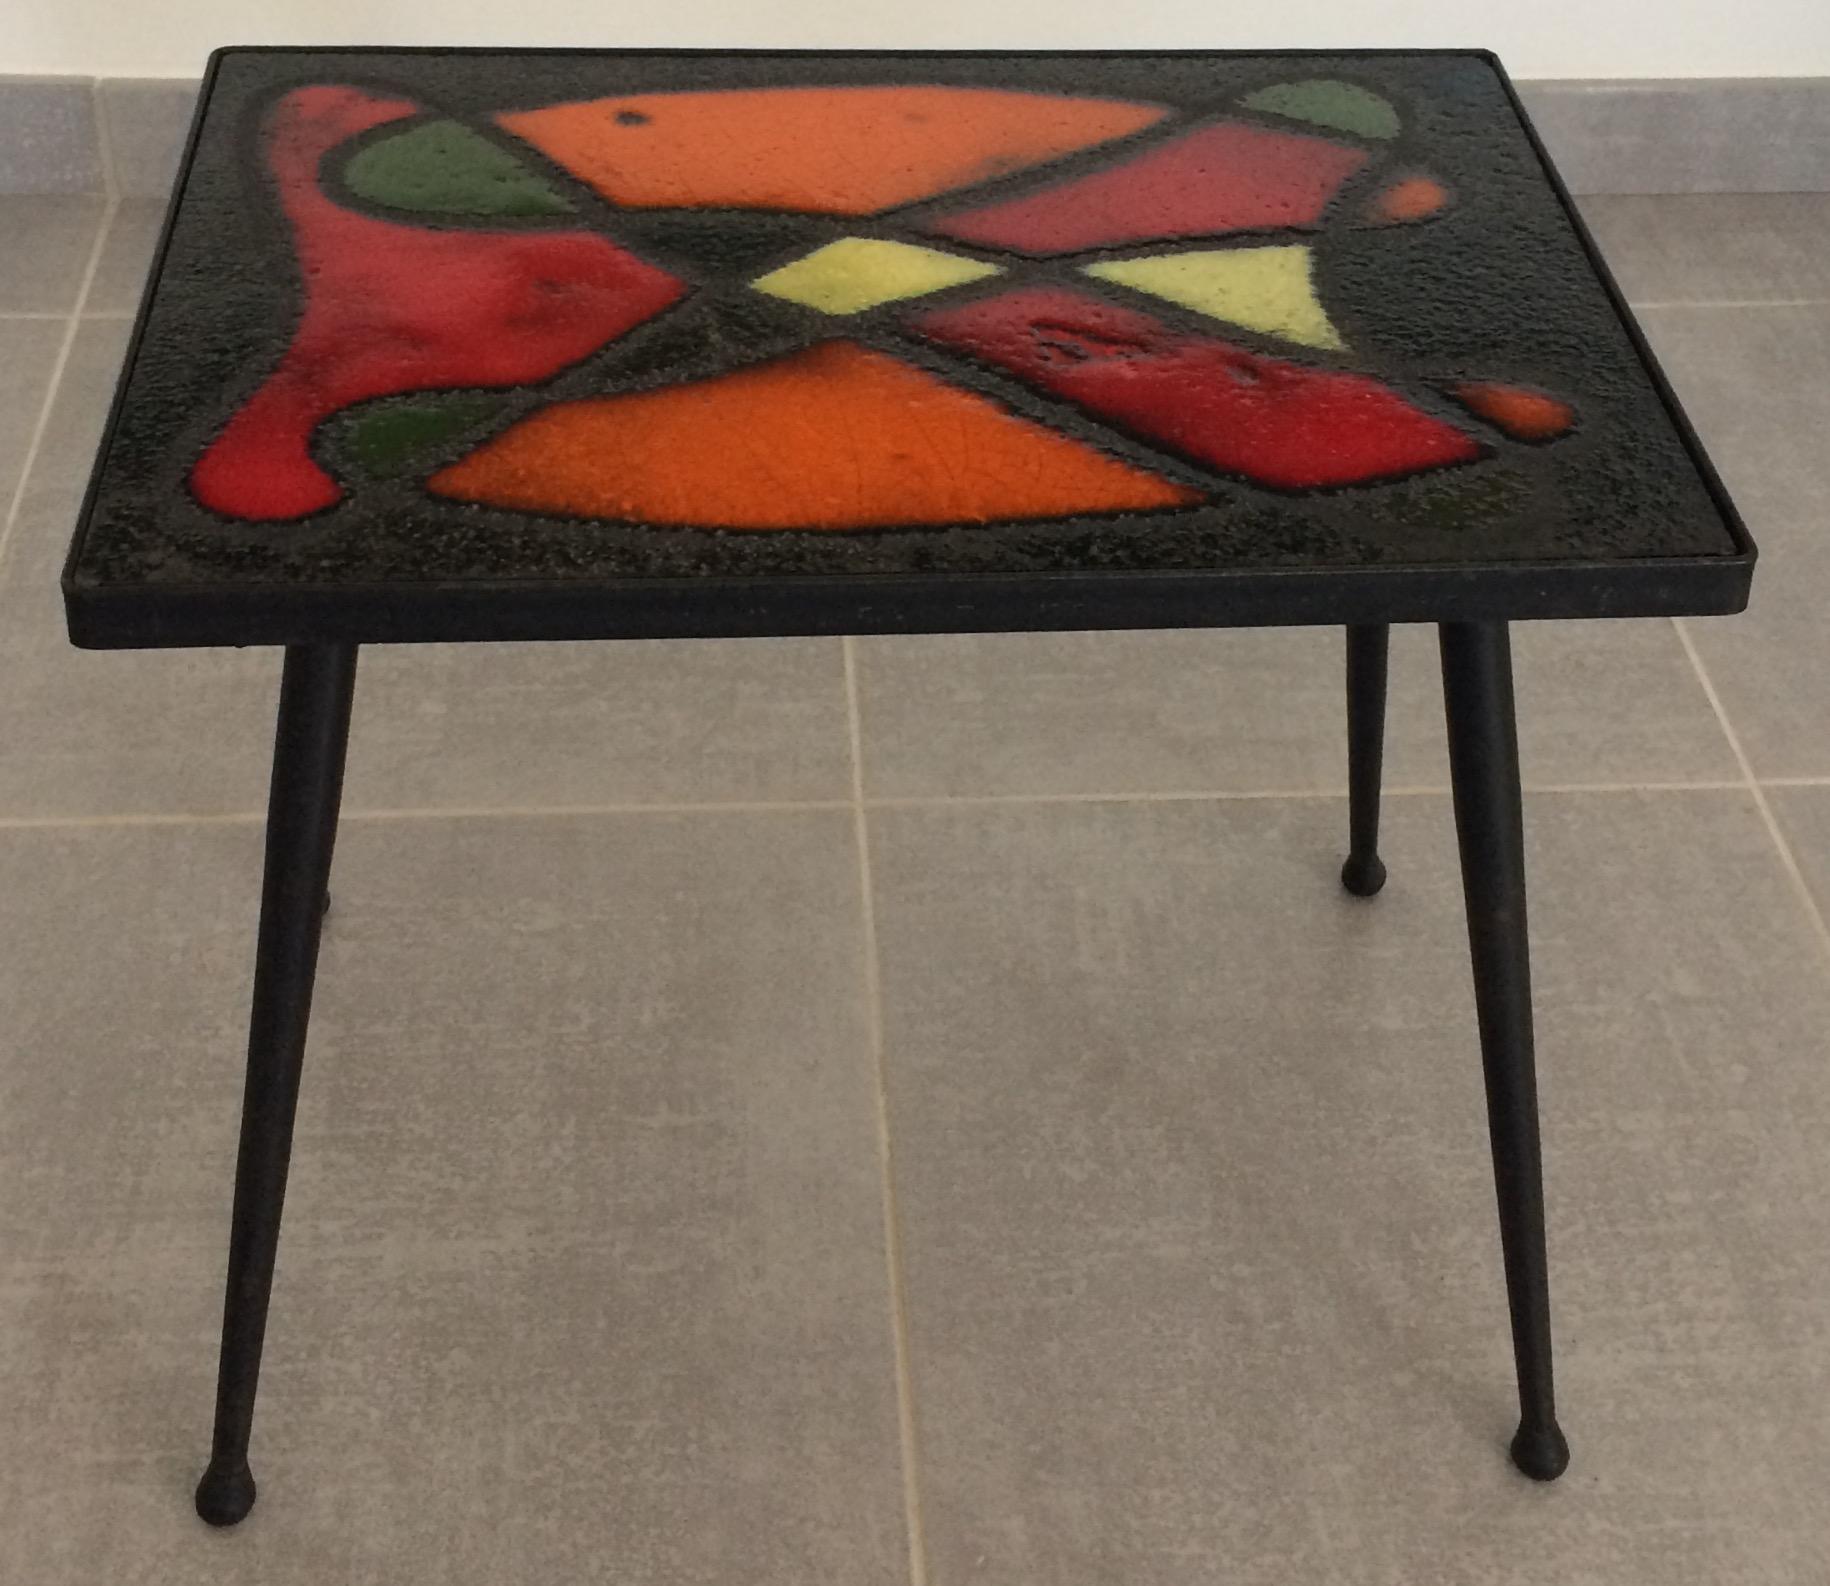 A boldly colorful glazed ceramic tile table by Jean and Robert Cloutier, circa 1960, France. 
Stunning colors of hot orange, bright red, black, grassy green and pale yellow.

This table by the dynamic design duo can be converted into artwork to be